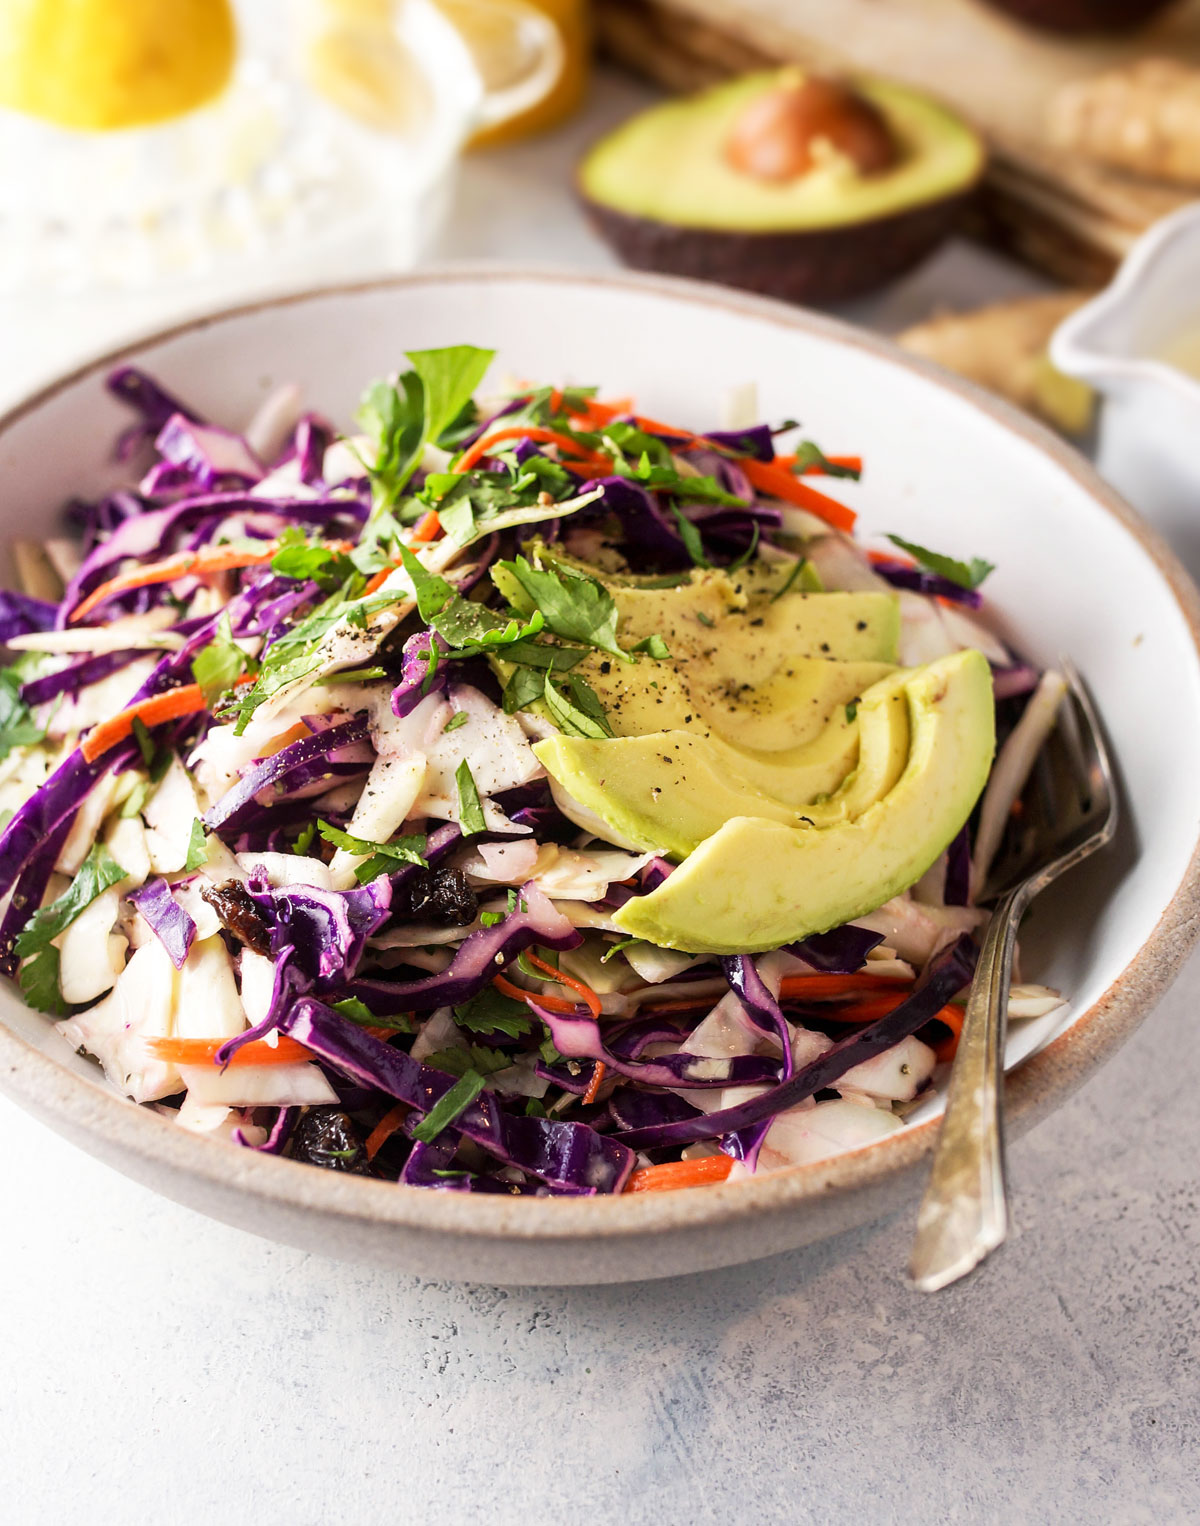 bowl of detox salad with lemon ginger dressing and slices of avocado on top